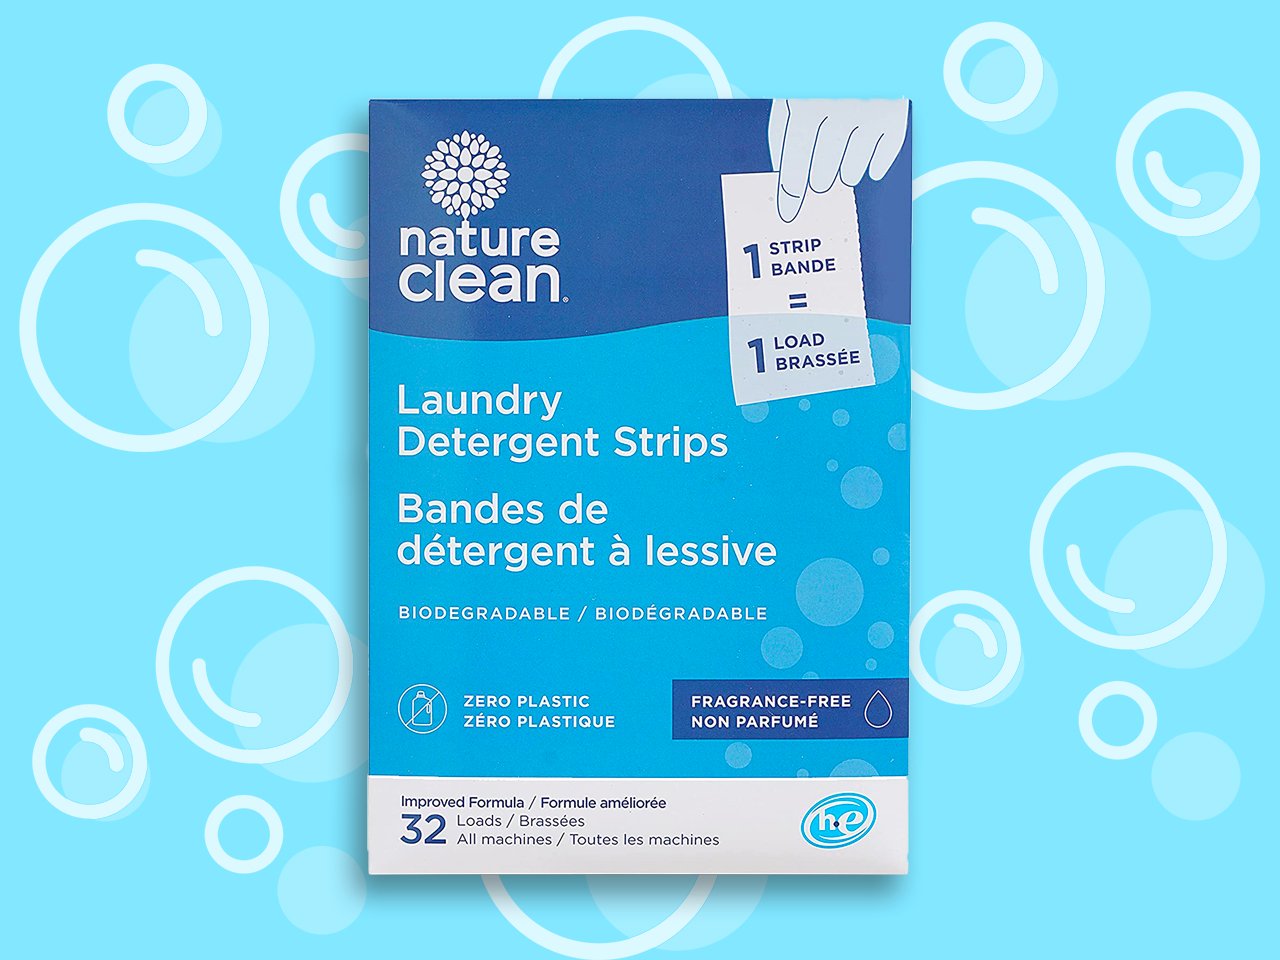 Nature clean laundry strips